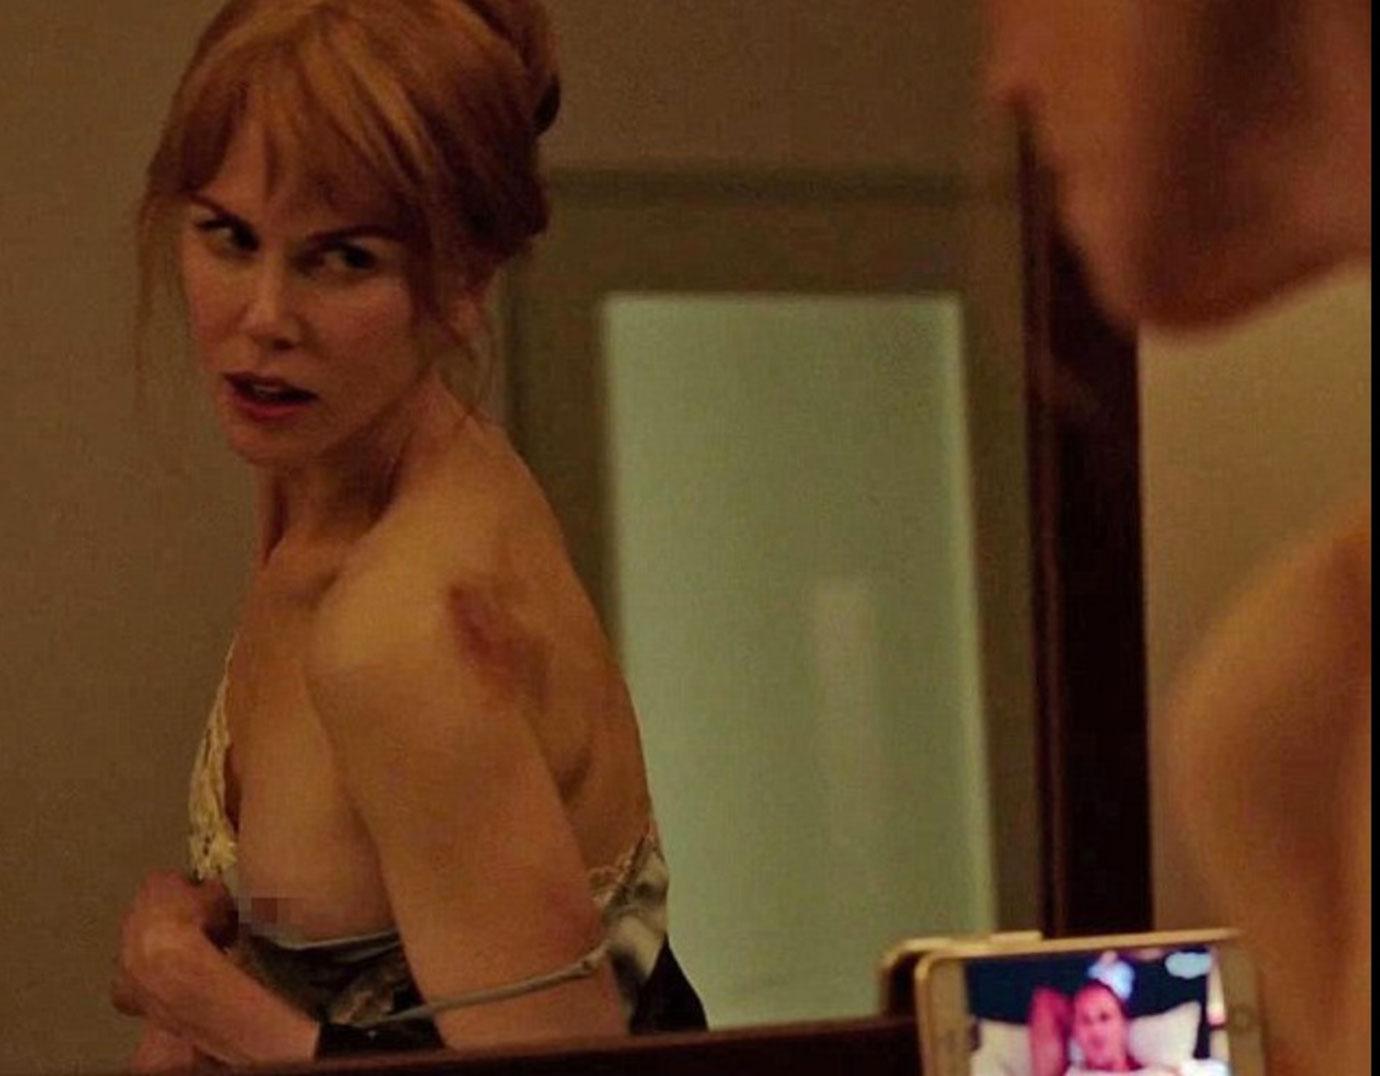 Naked pictures of nicole kidman